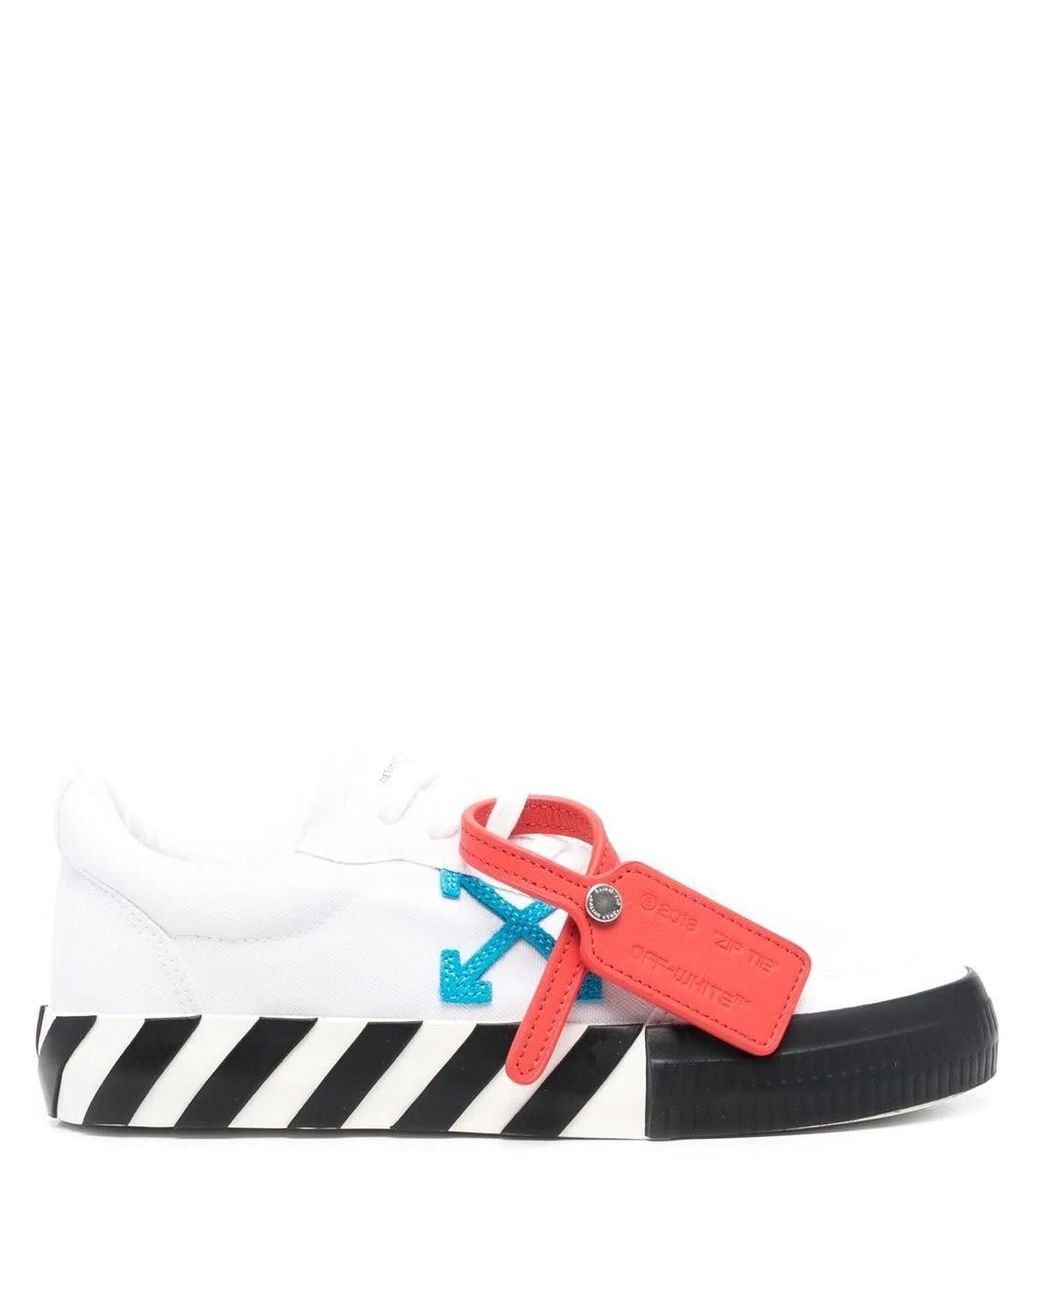 Off-White c/o Virgil Abloh White, Black And Turquoise Low Vulcanized ...